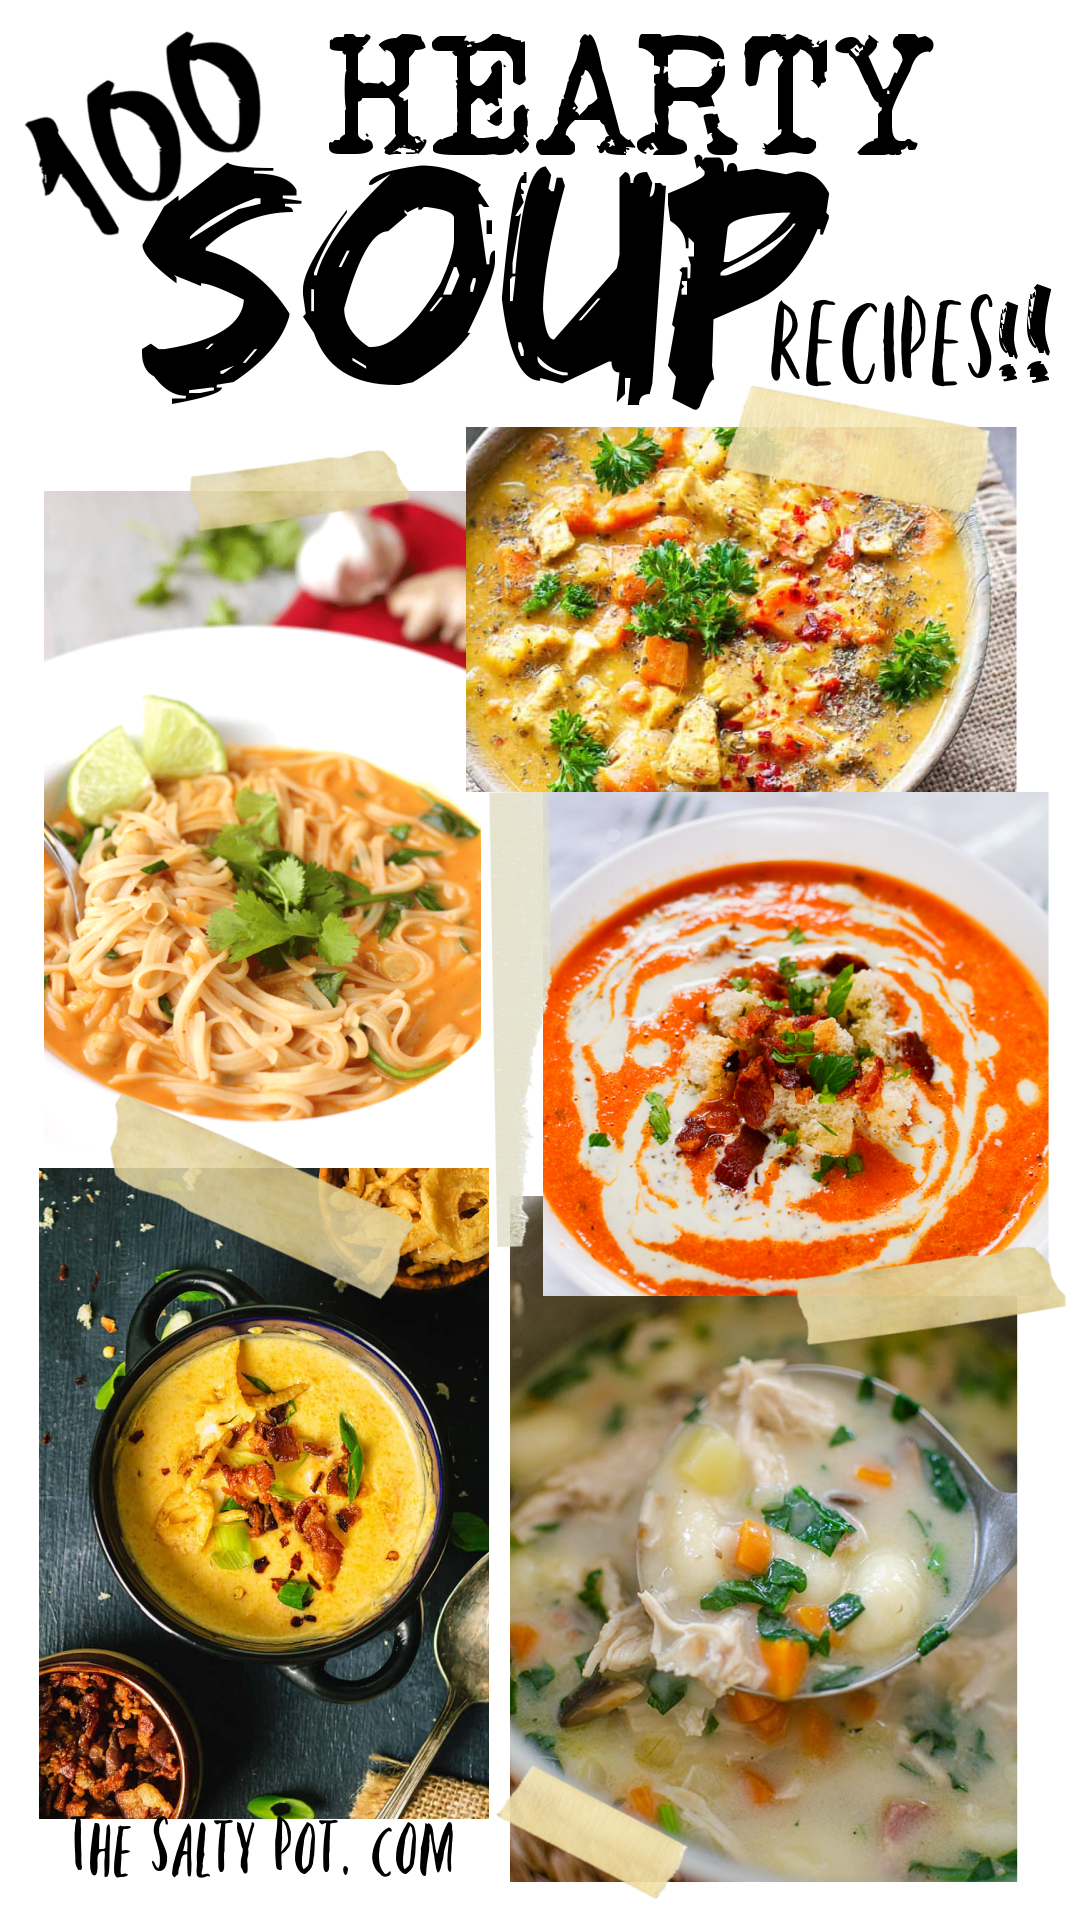 100+ HEARTY SOUP RECIPES | The Salty Pot